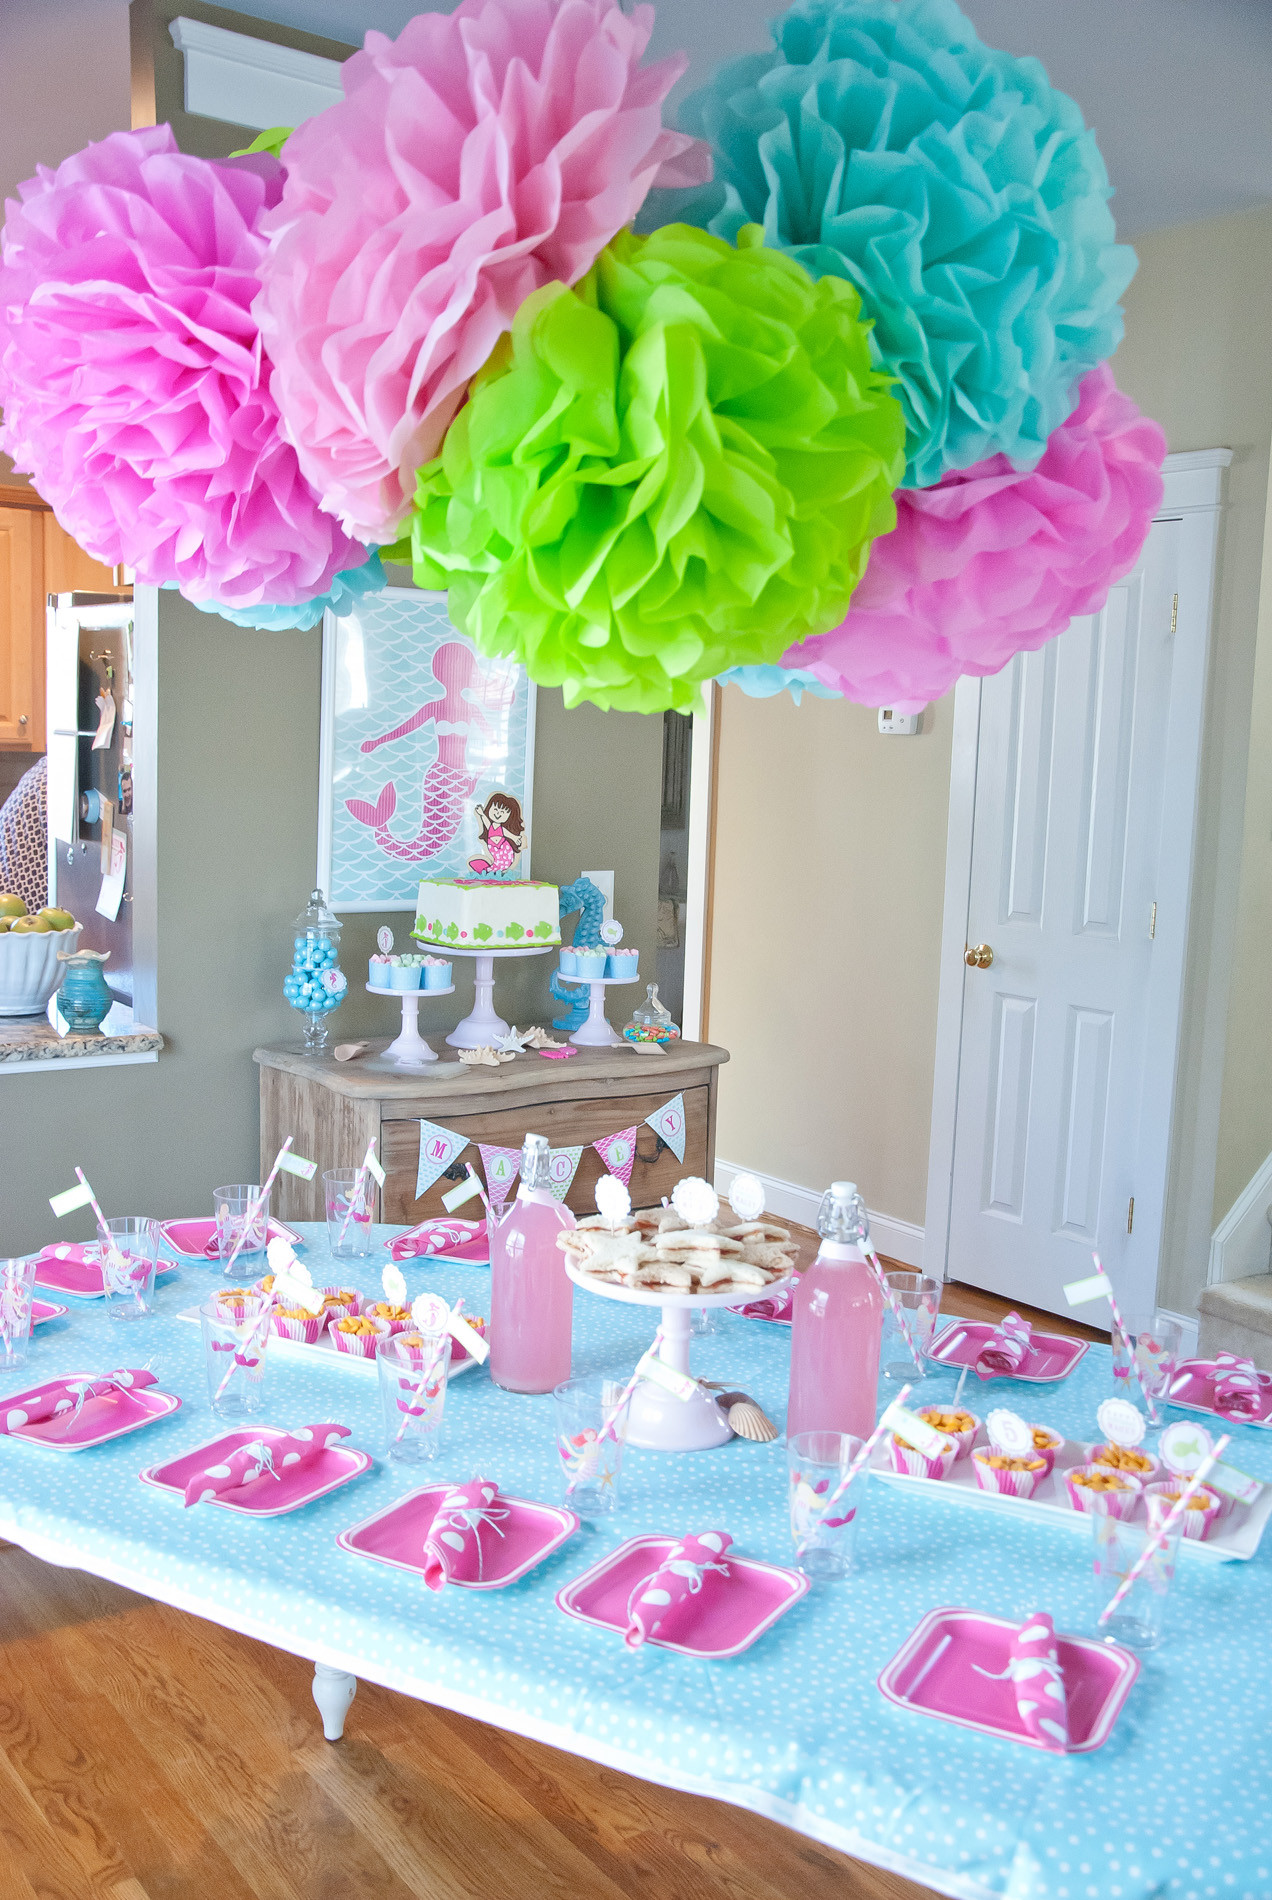 Birthday Party Table Decorations Centerpieces
 A Dreamy Mermaid Birthday Party Anders Ruff Custom